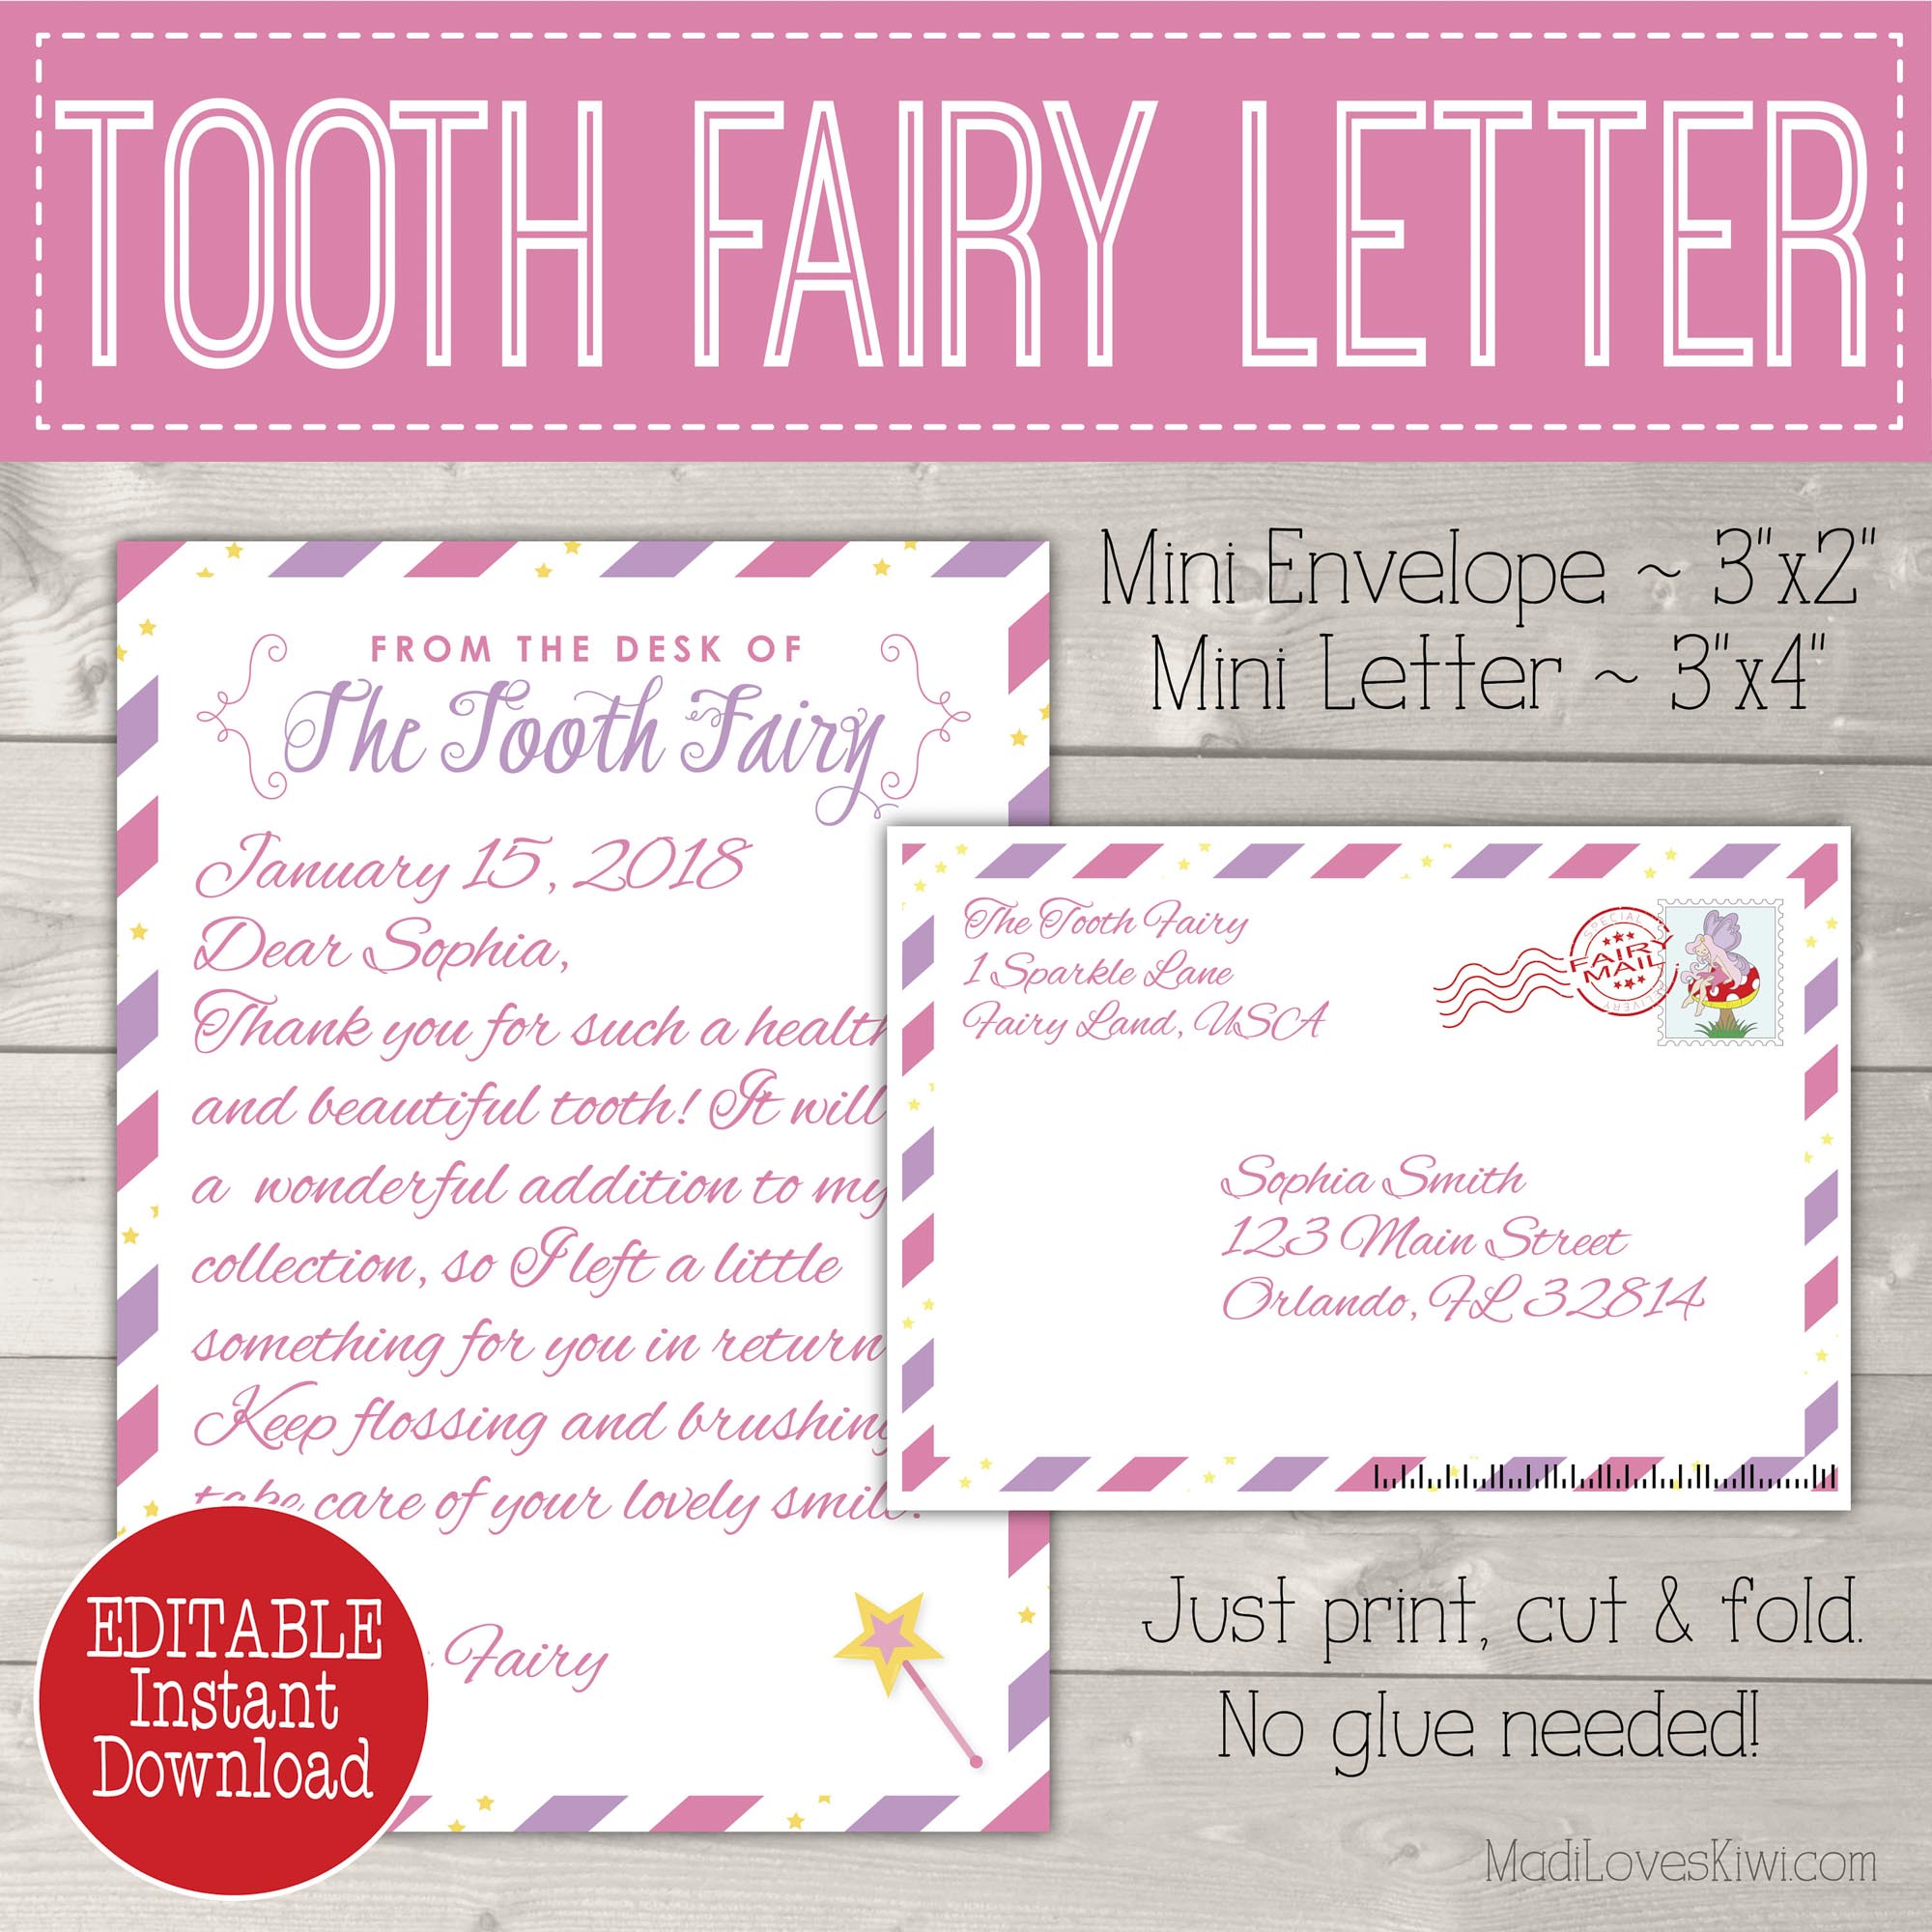 free-printable-tooth-fairy-letter-and-envelope-printable-blog